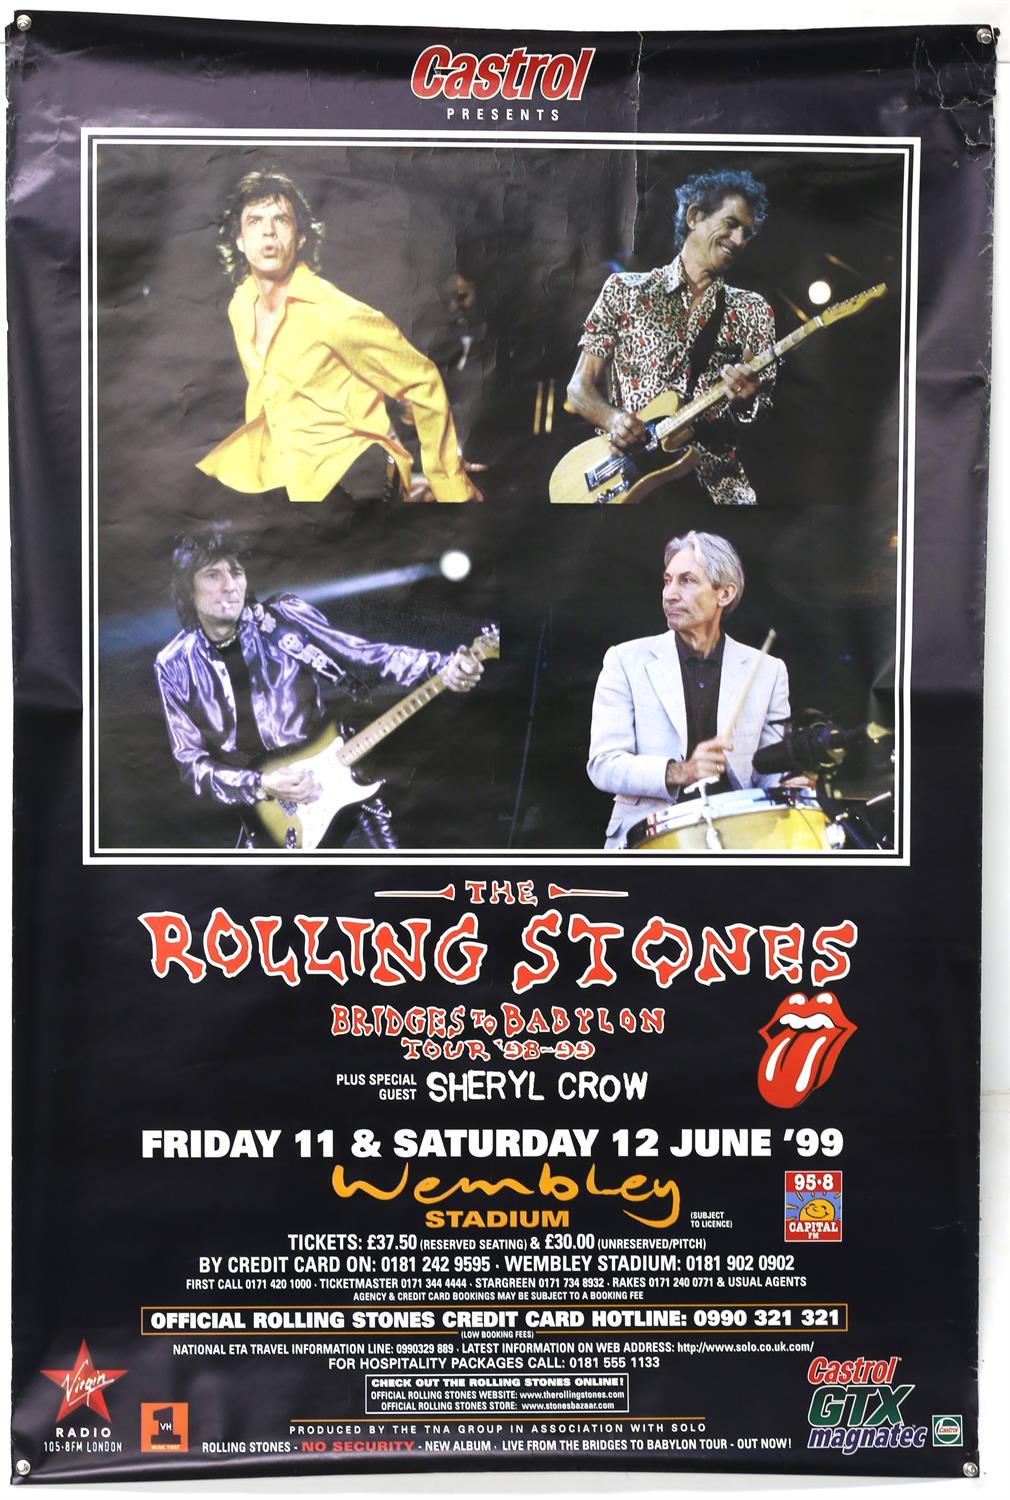 The Rolling Stones - Two Bus Stop music posters for Bridges to Babylon and You Can't Lick 'Em, - Image 4 of 6